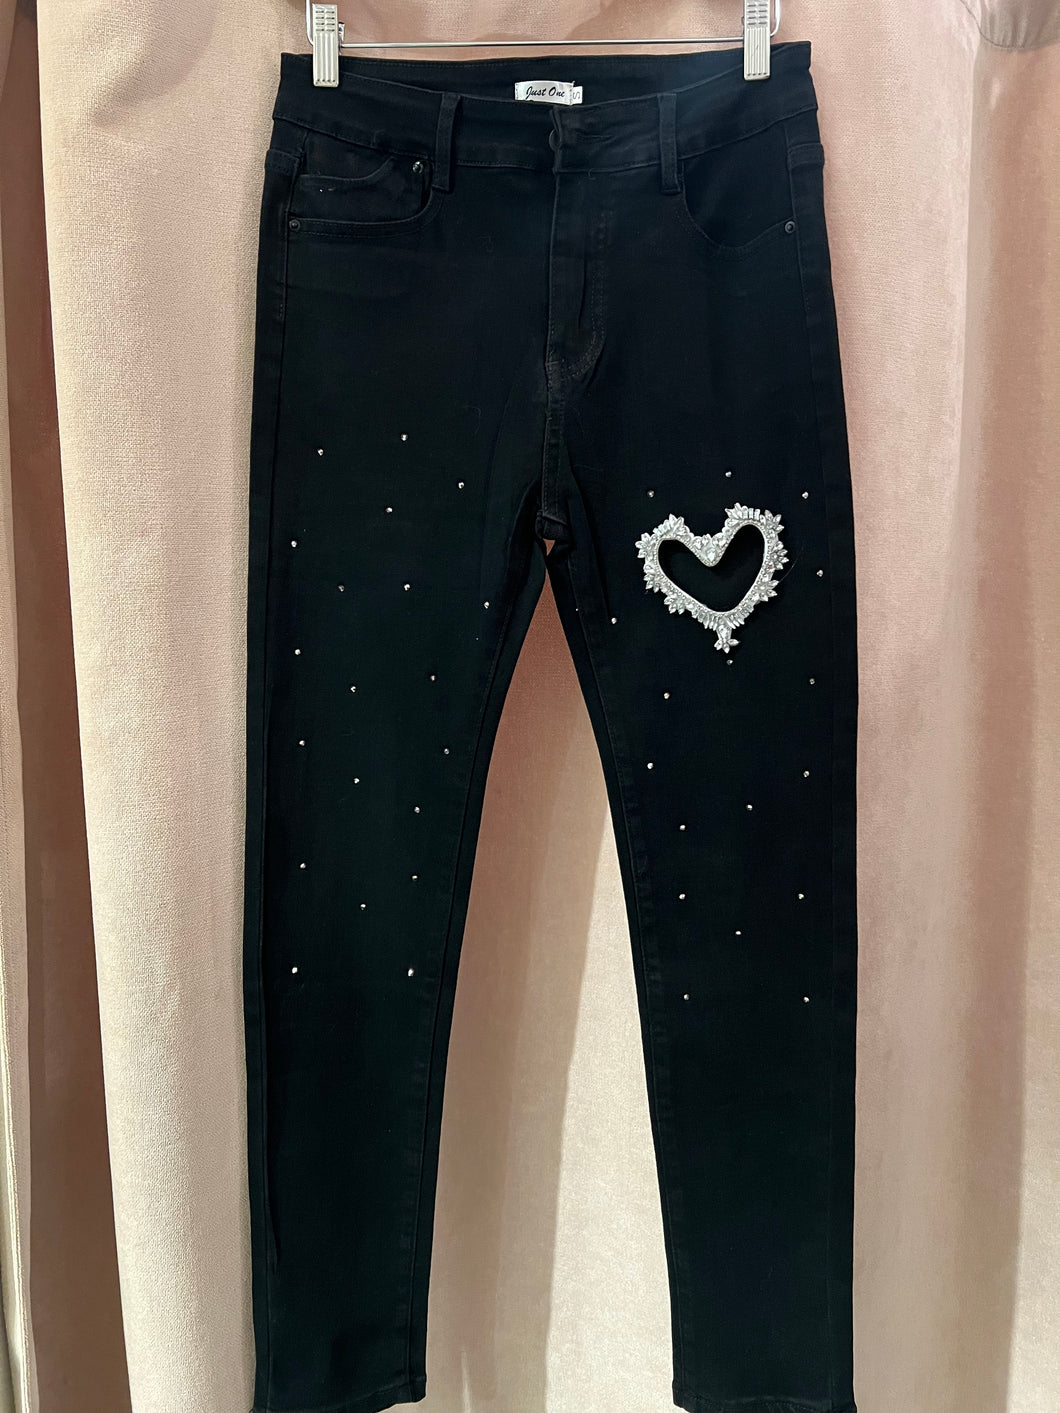 J black jeans with cut out heart